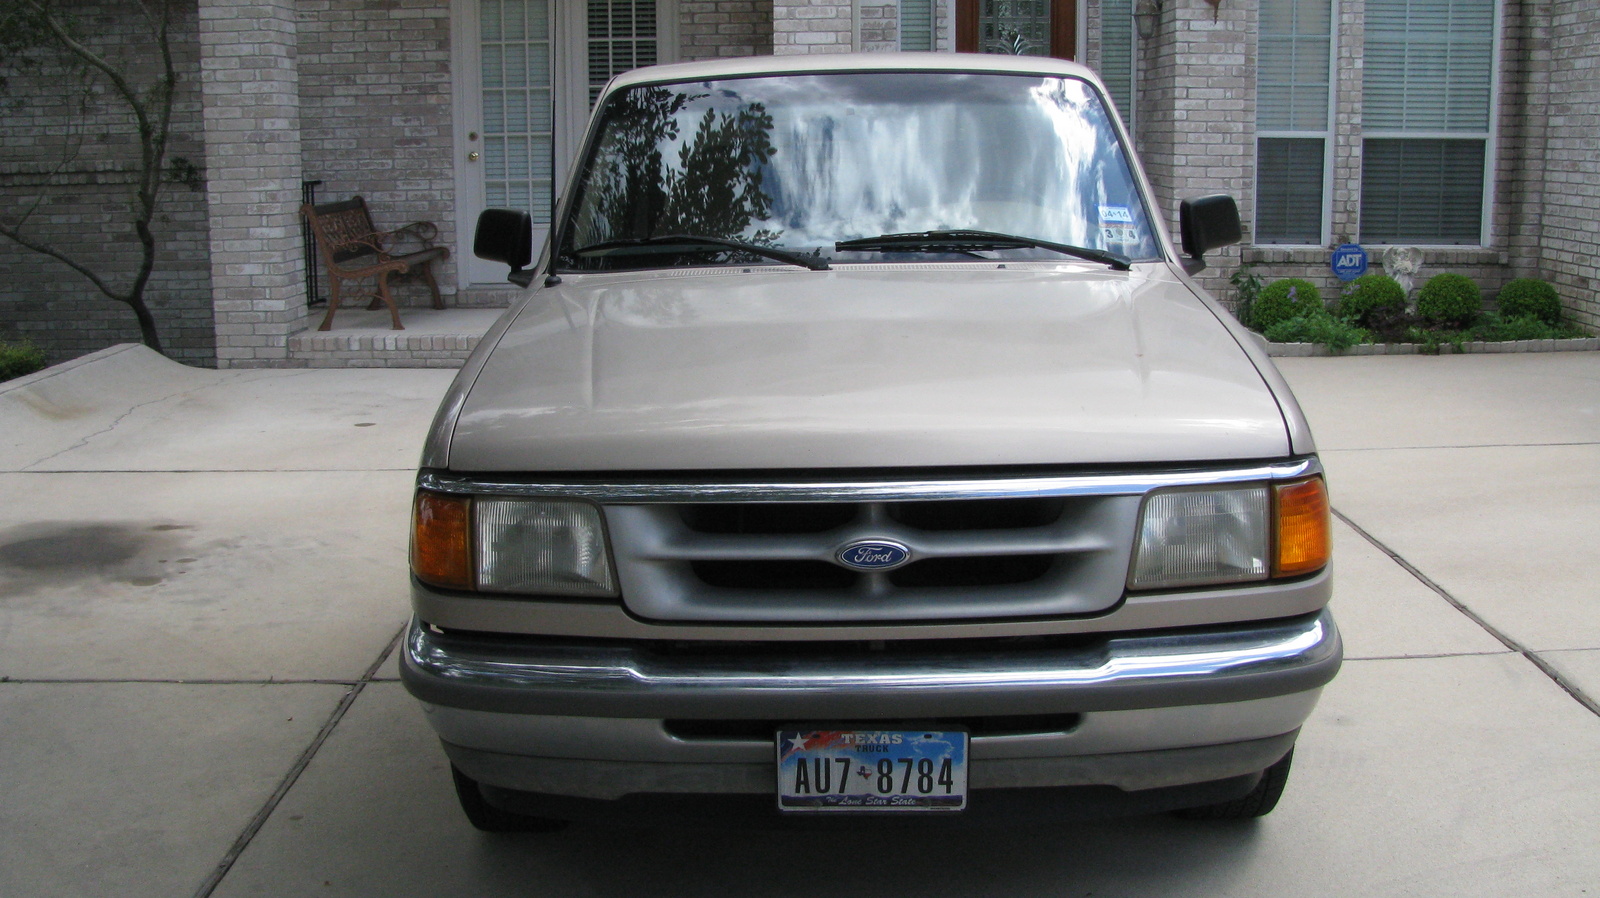 1996 Ford ranger extended cab reviews #2